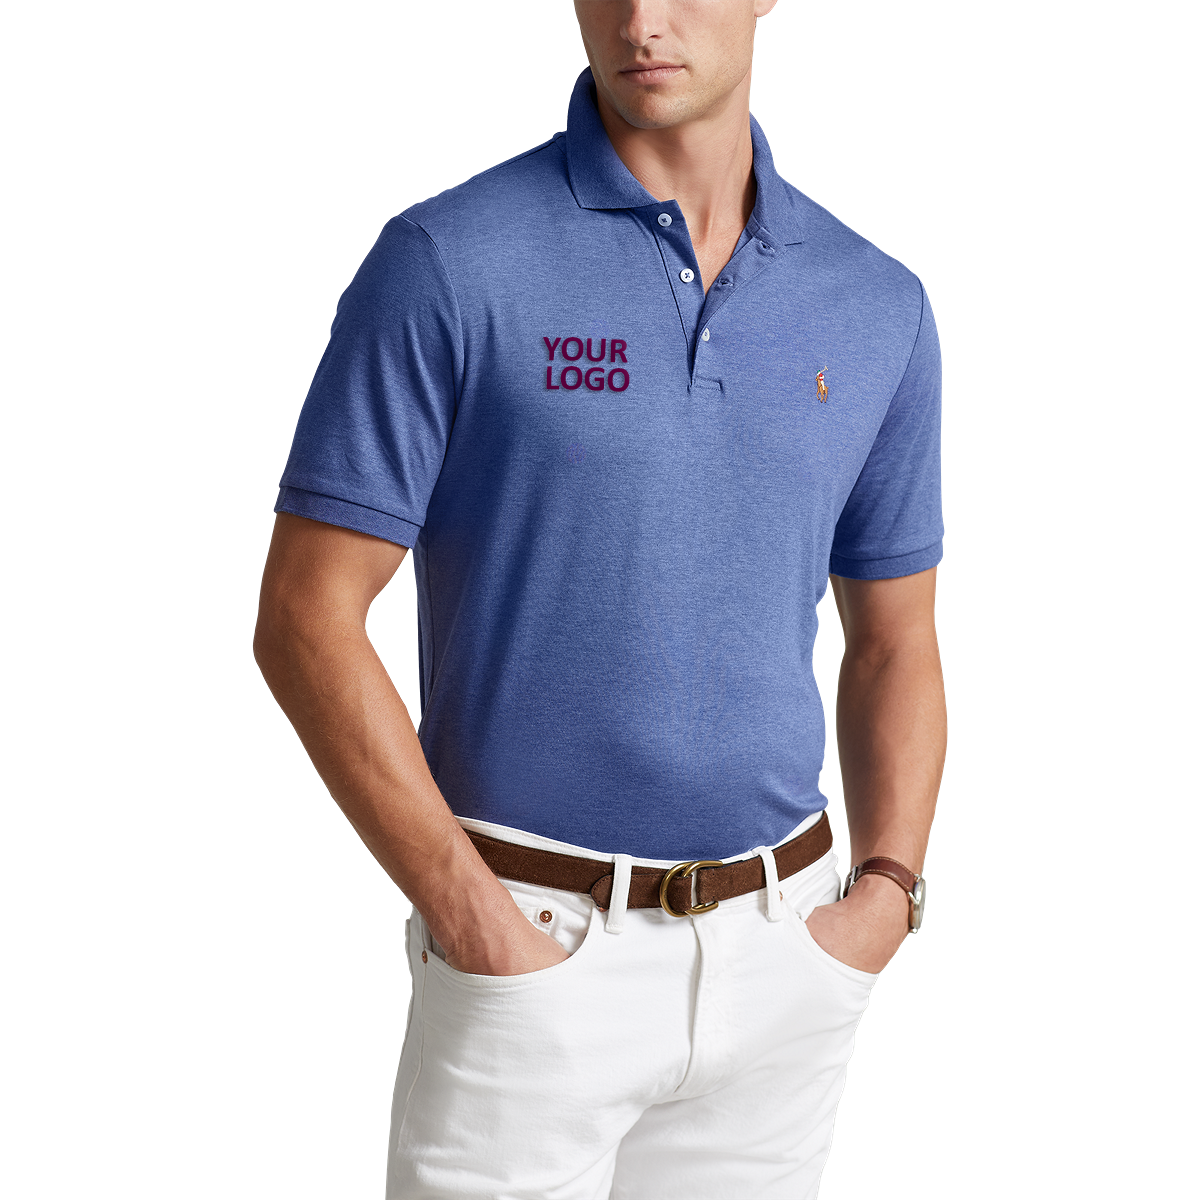 Ralph Lauren Soft Touch Polo - Classic Fit KSC53A Faded Royal Heather